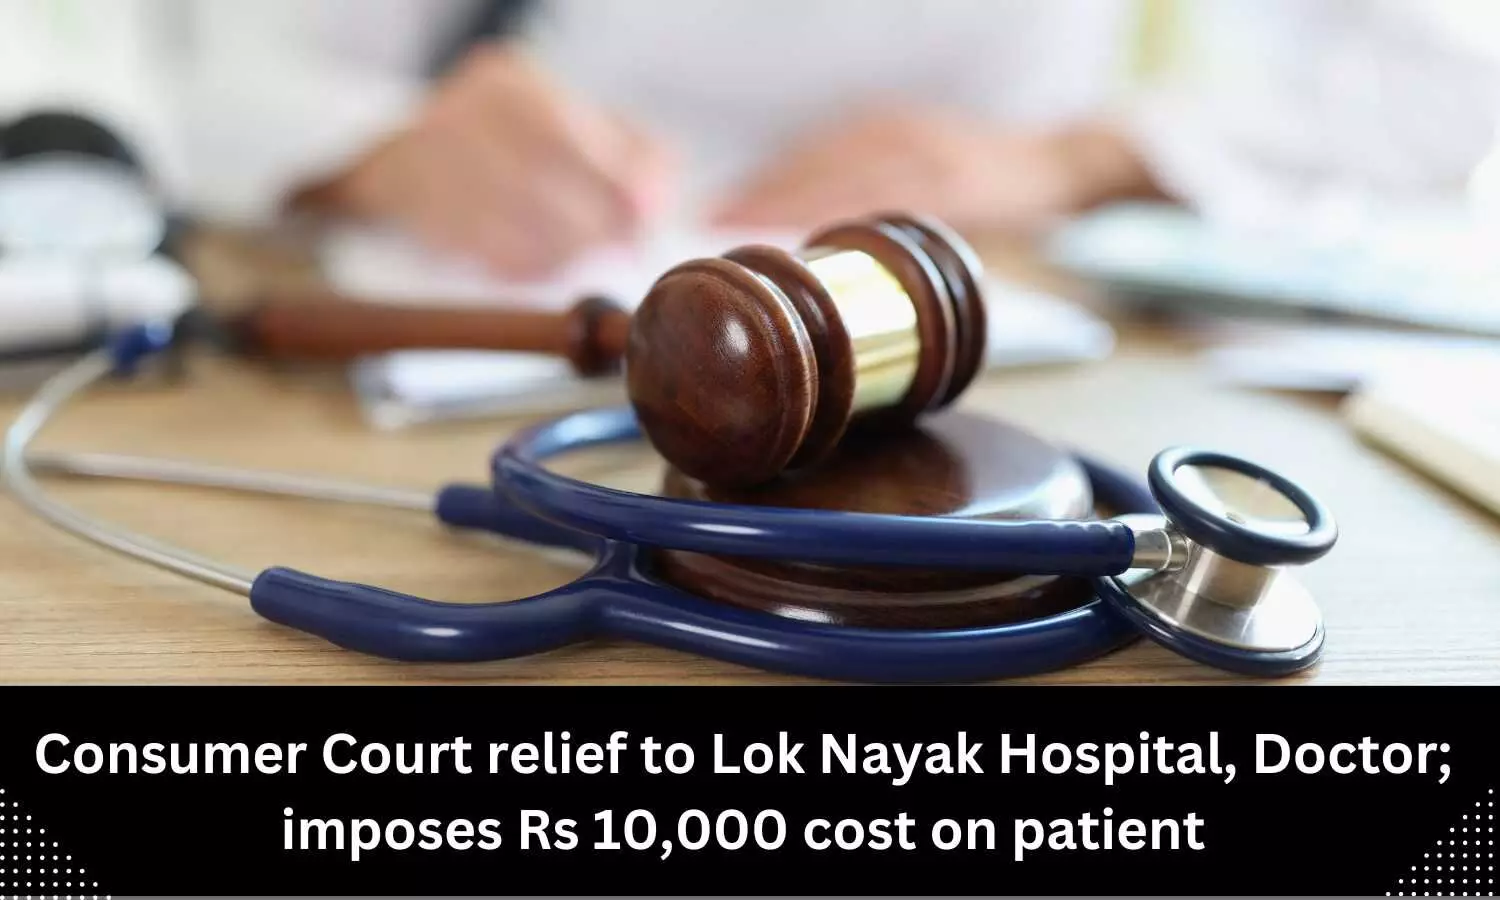 Consumer Court relief to Lok Nayak Hospital, Doctor; imposes Rs 10,000 cost on patient